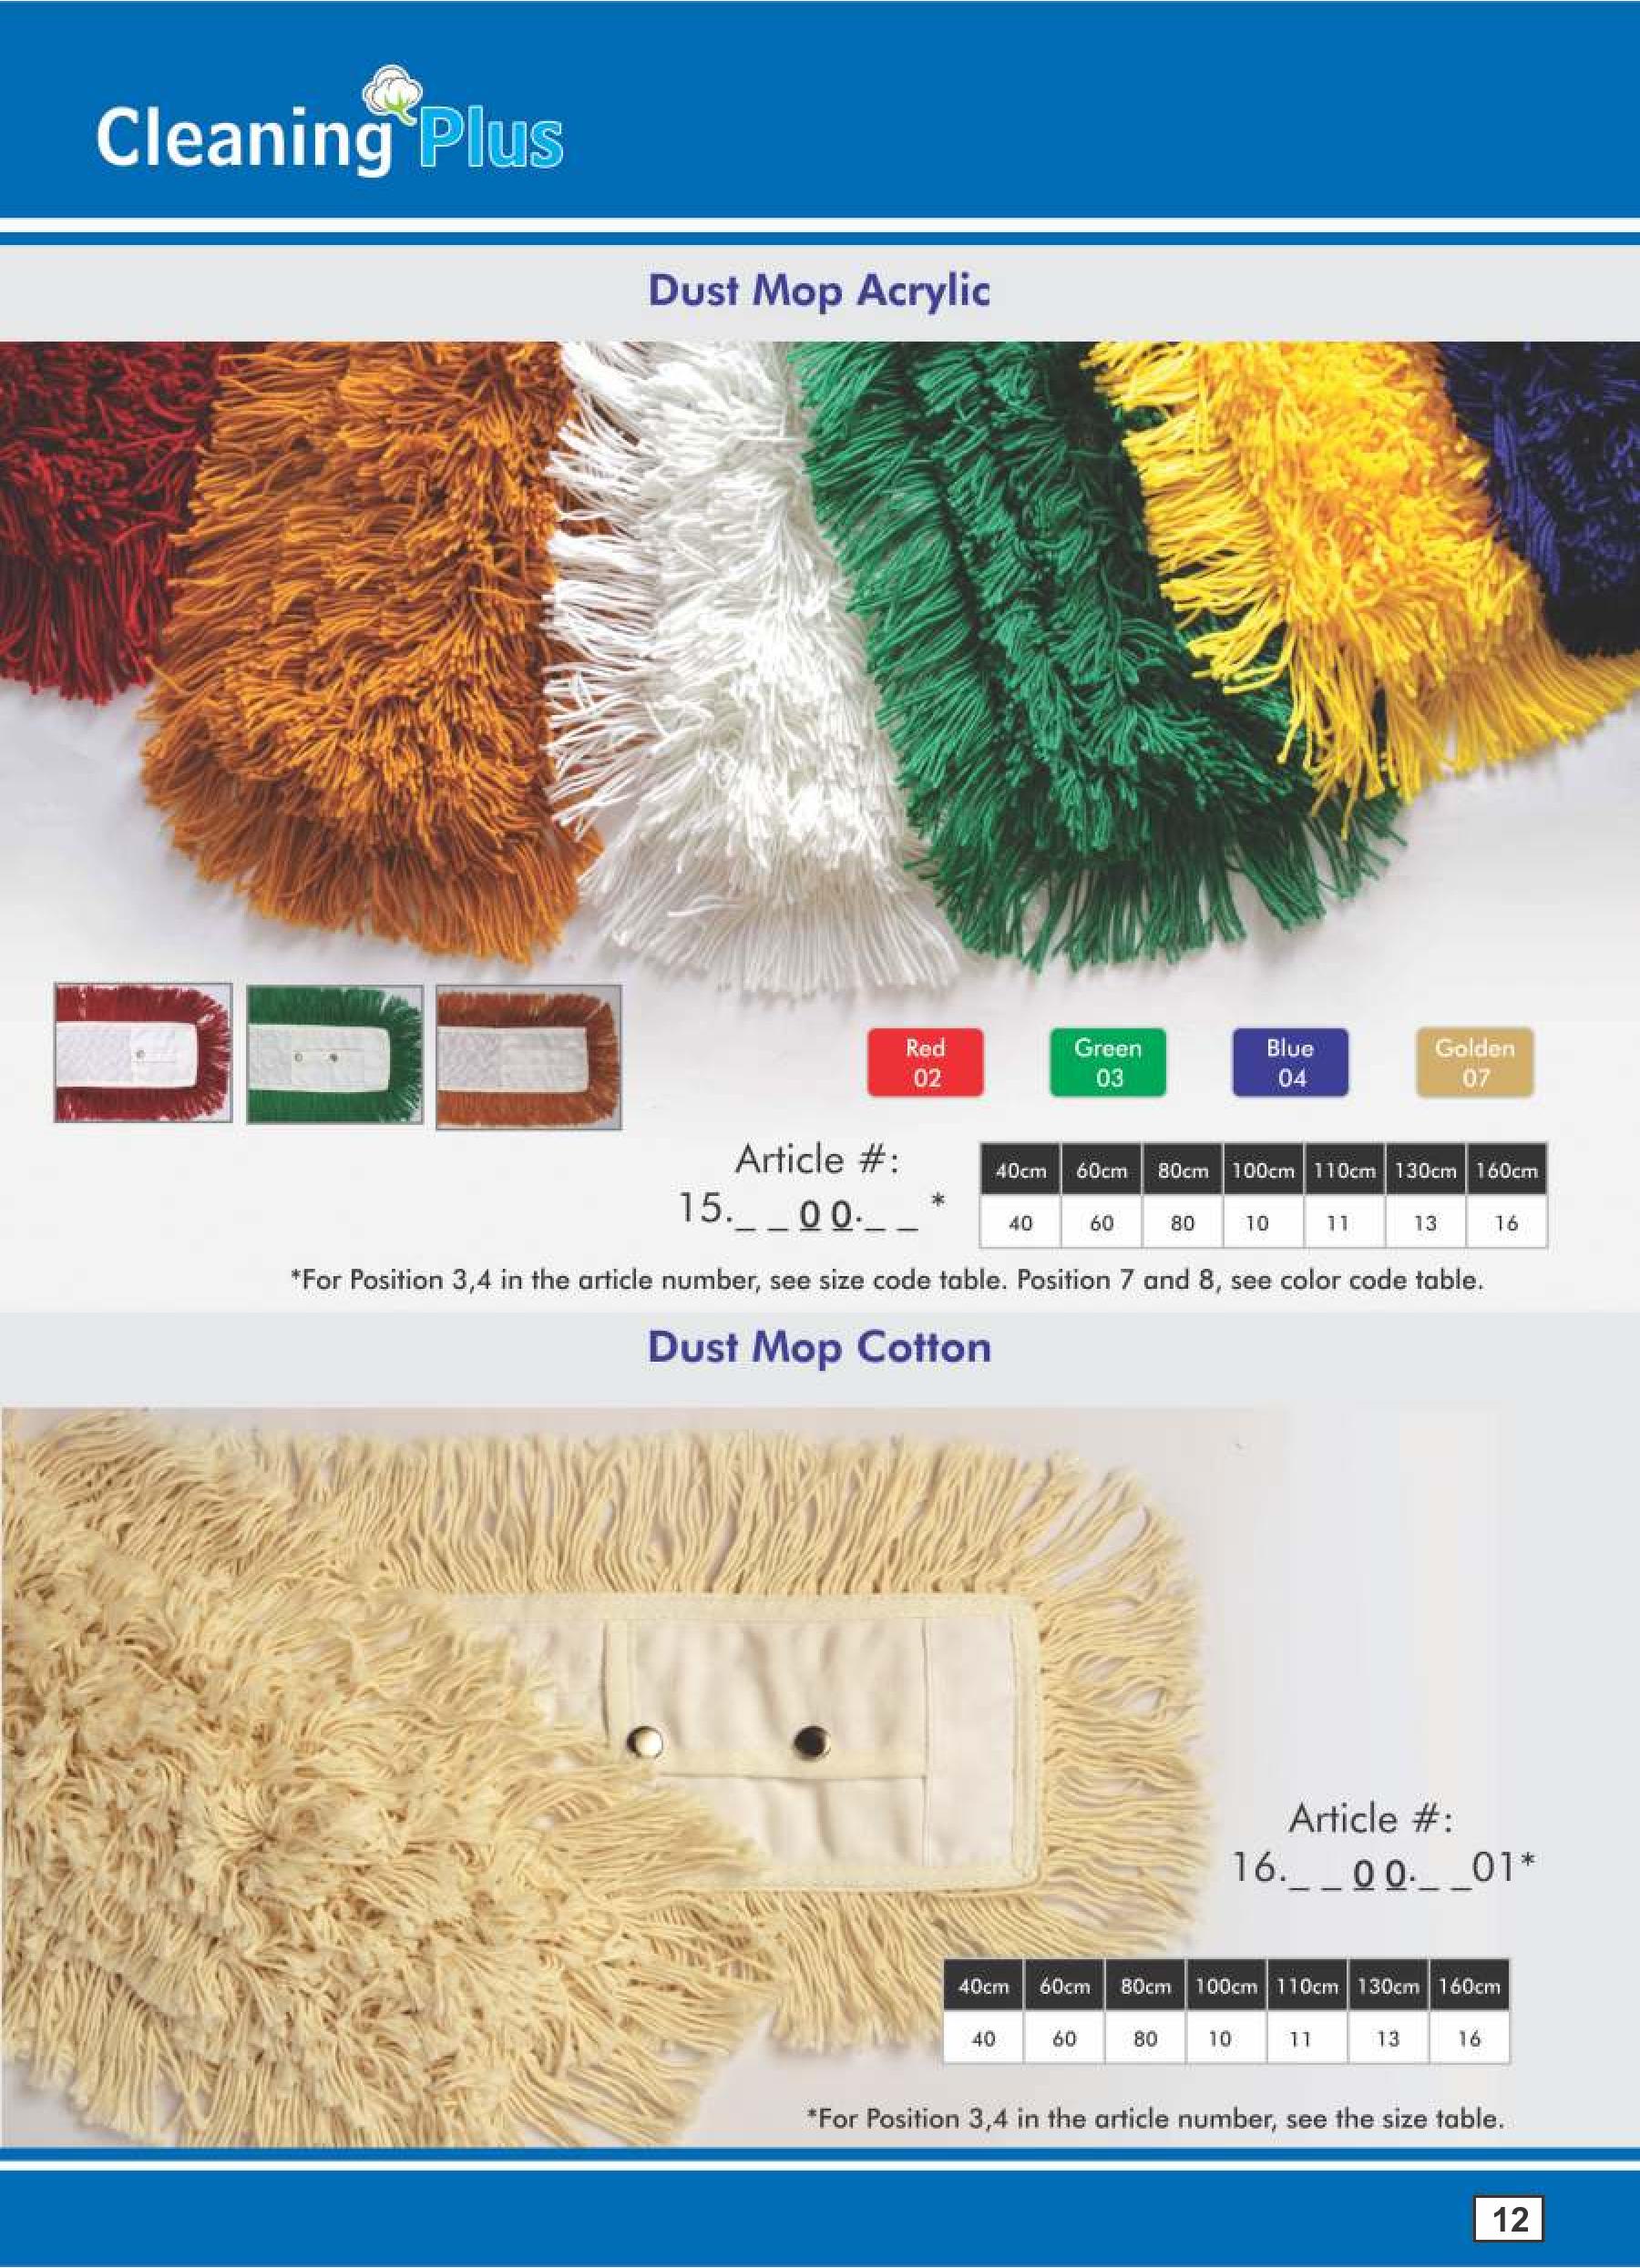 Dust Mop acrylic, available in all colors